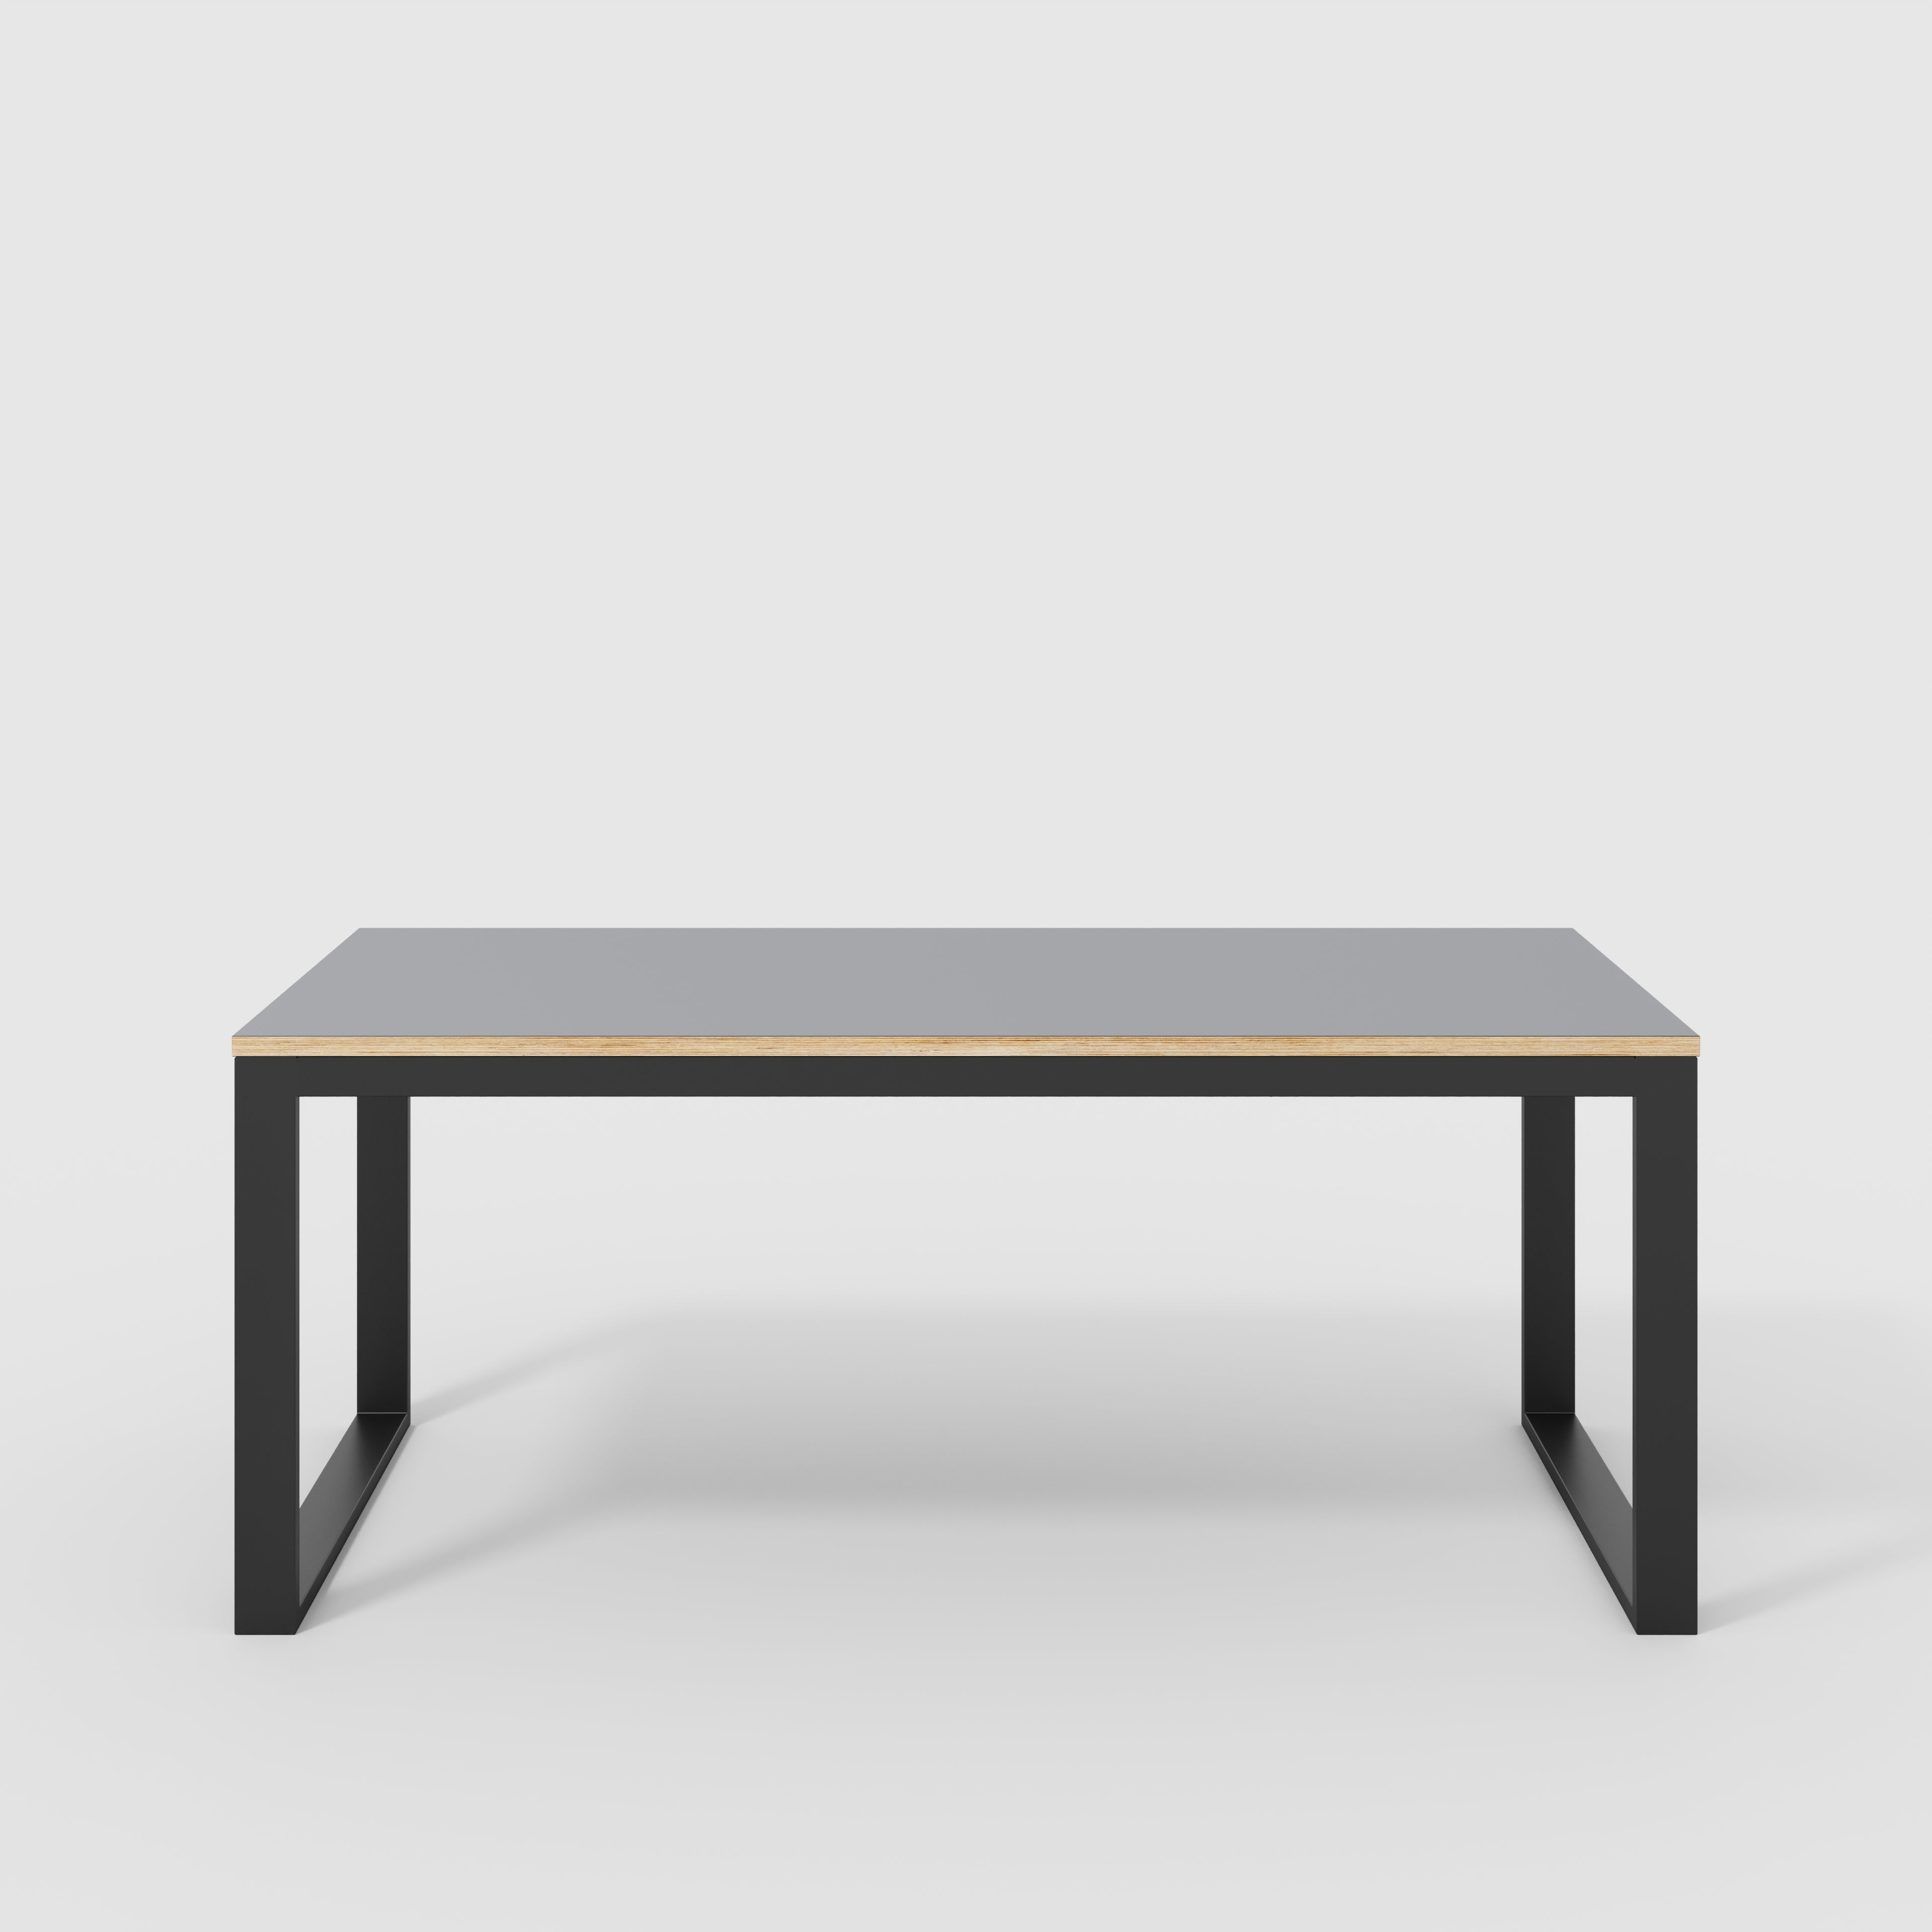 Table with Black Industrial Frame - Formica Tornado Grey- 1800(w) x 745(d) x 735(h)